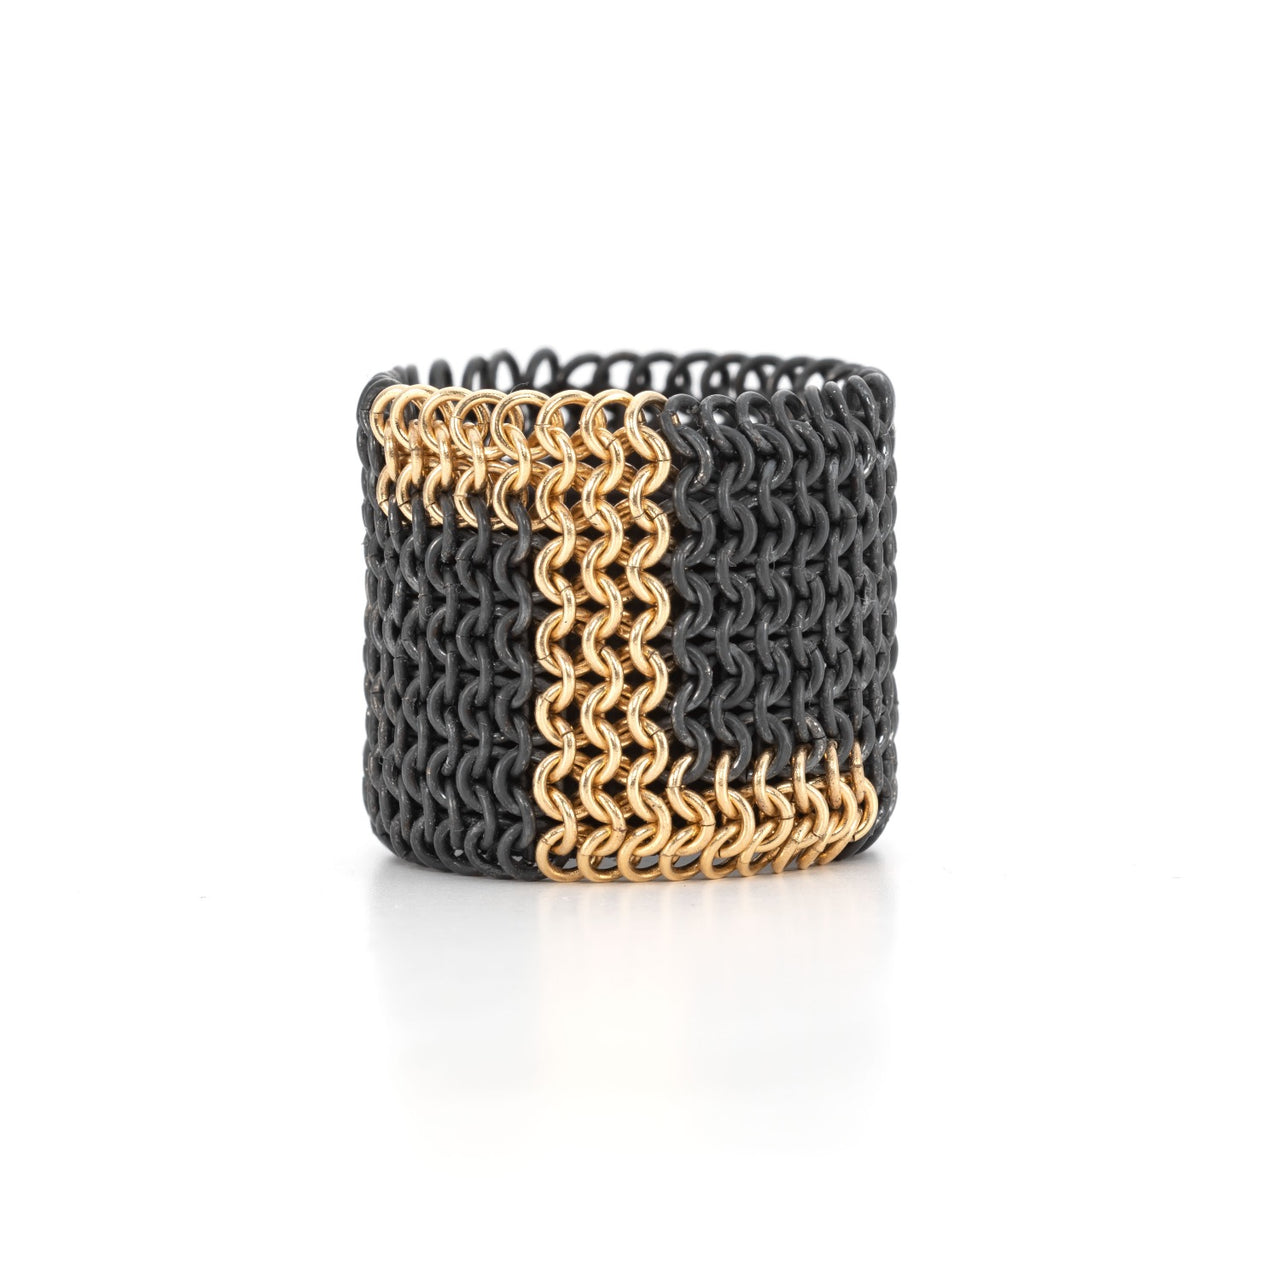 ThunderBolt Chainmail wide ring in 18ct yellow gold and oxidised silver. Mens jewelry women's rings by Corrinne Eira Evans